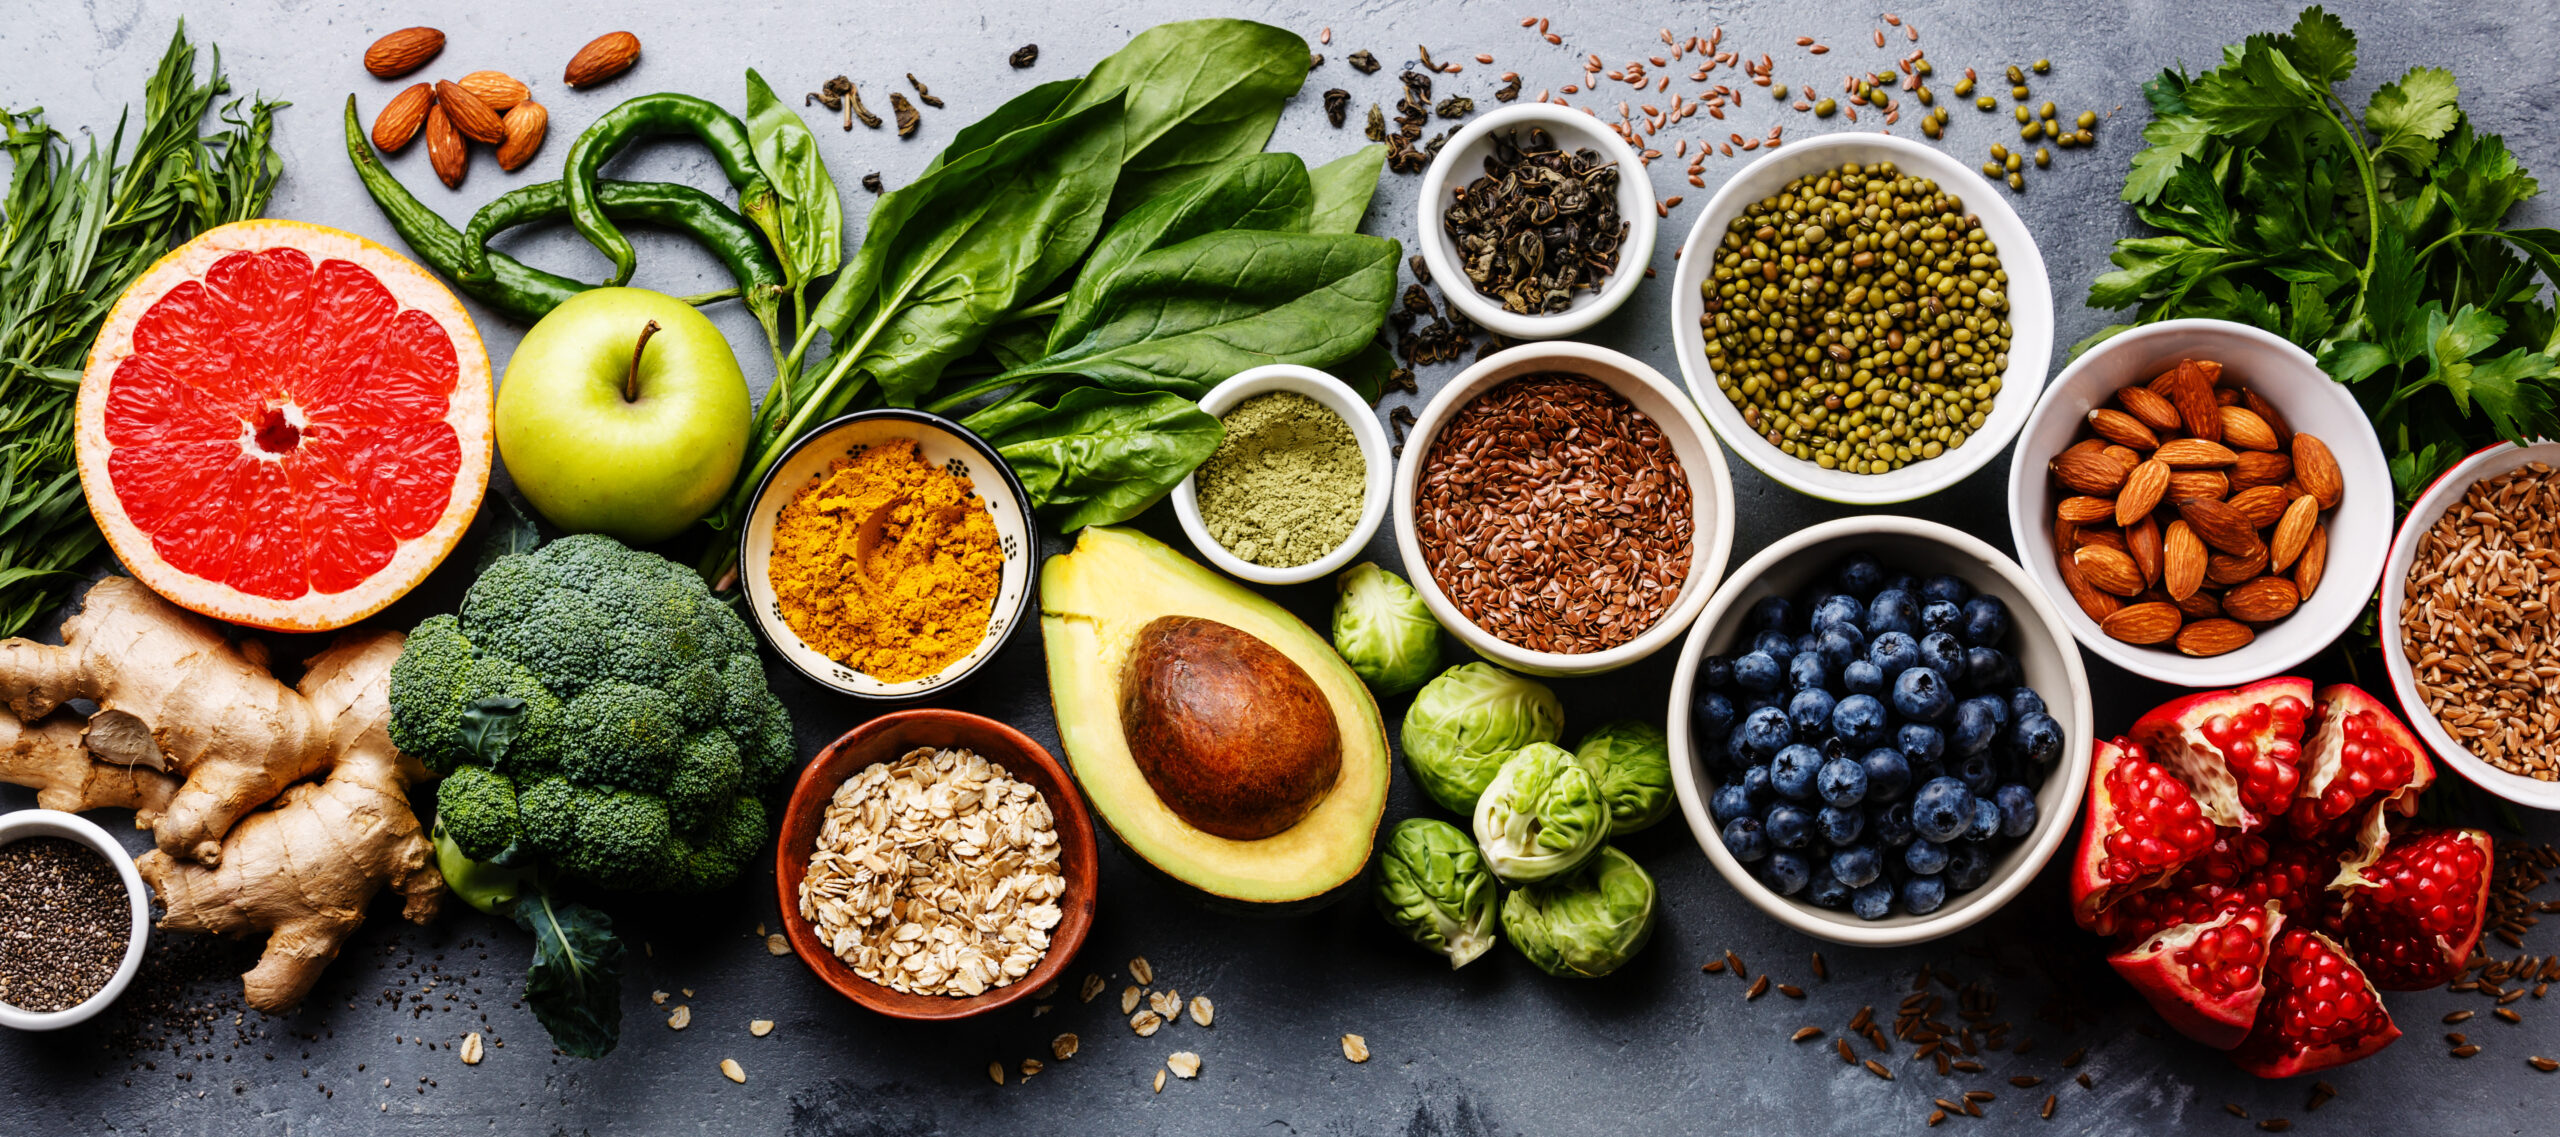 Lifestyle and dietary approaches can play a significant role in managing pelvic pain, especially when associated with conditions like endometriosis or other gynecological issues.